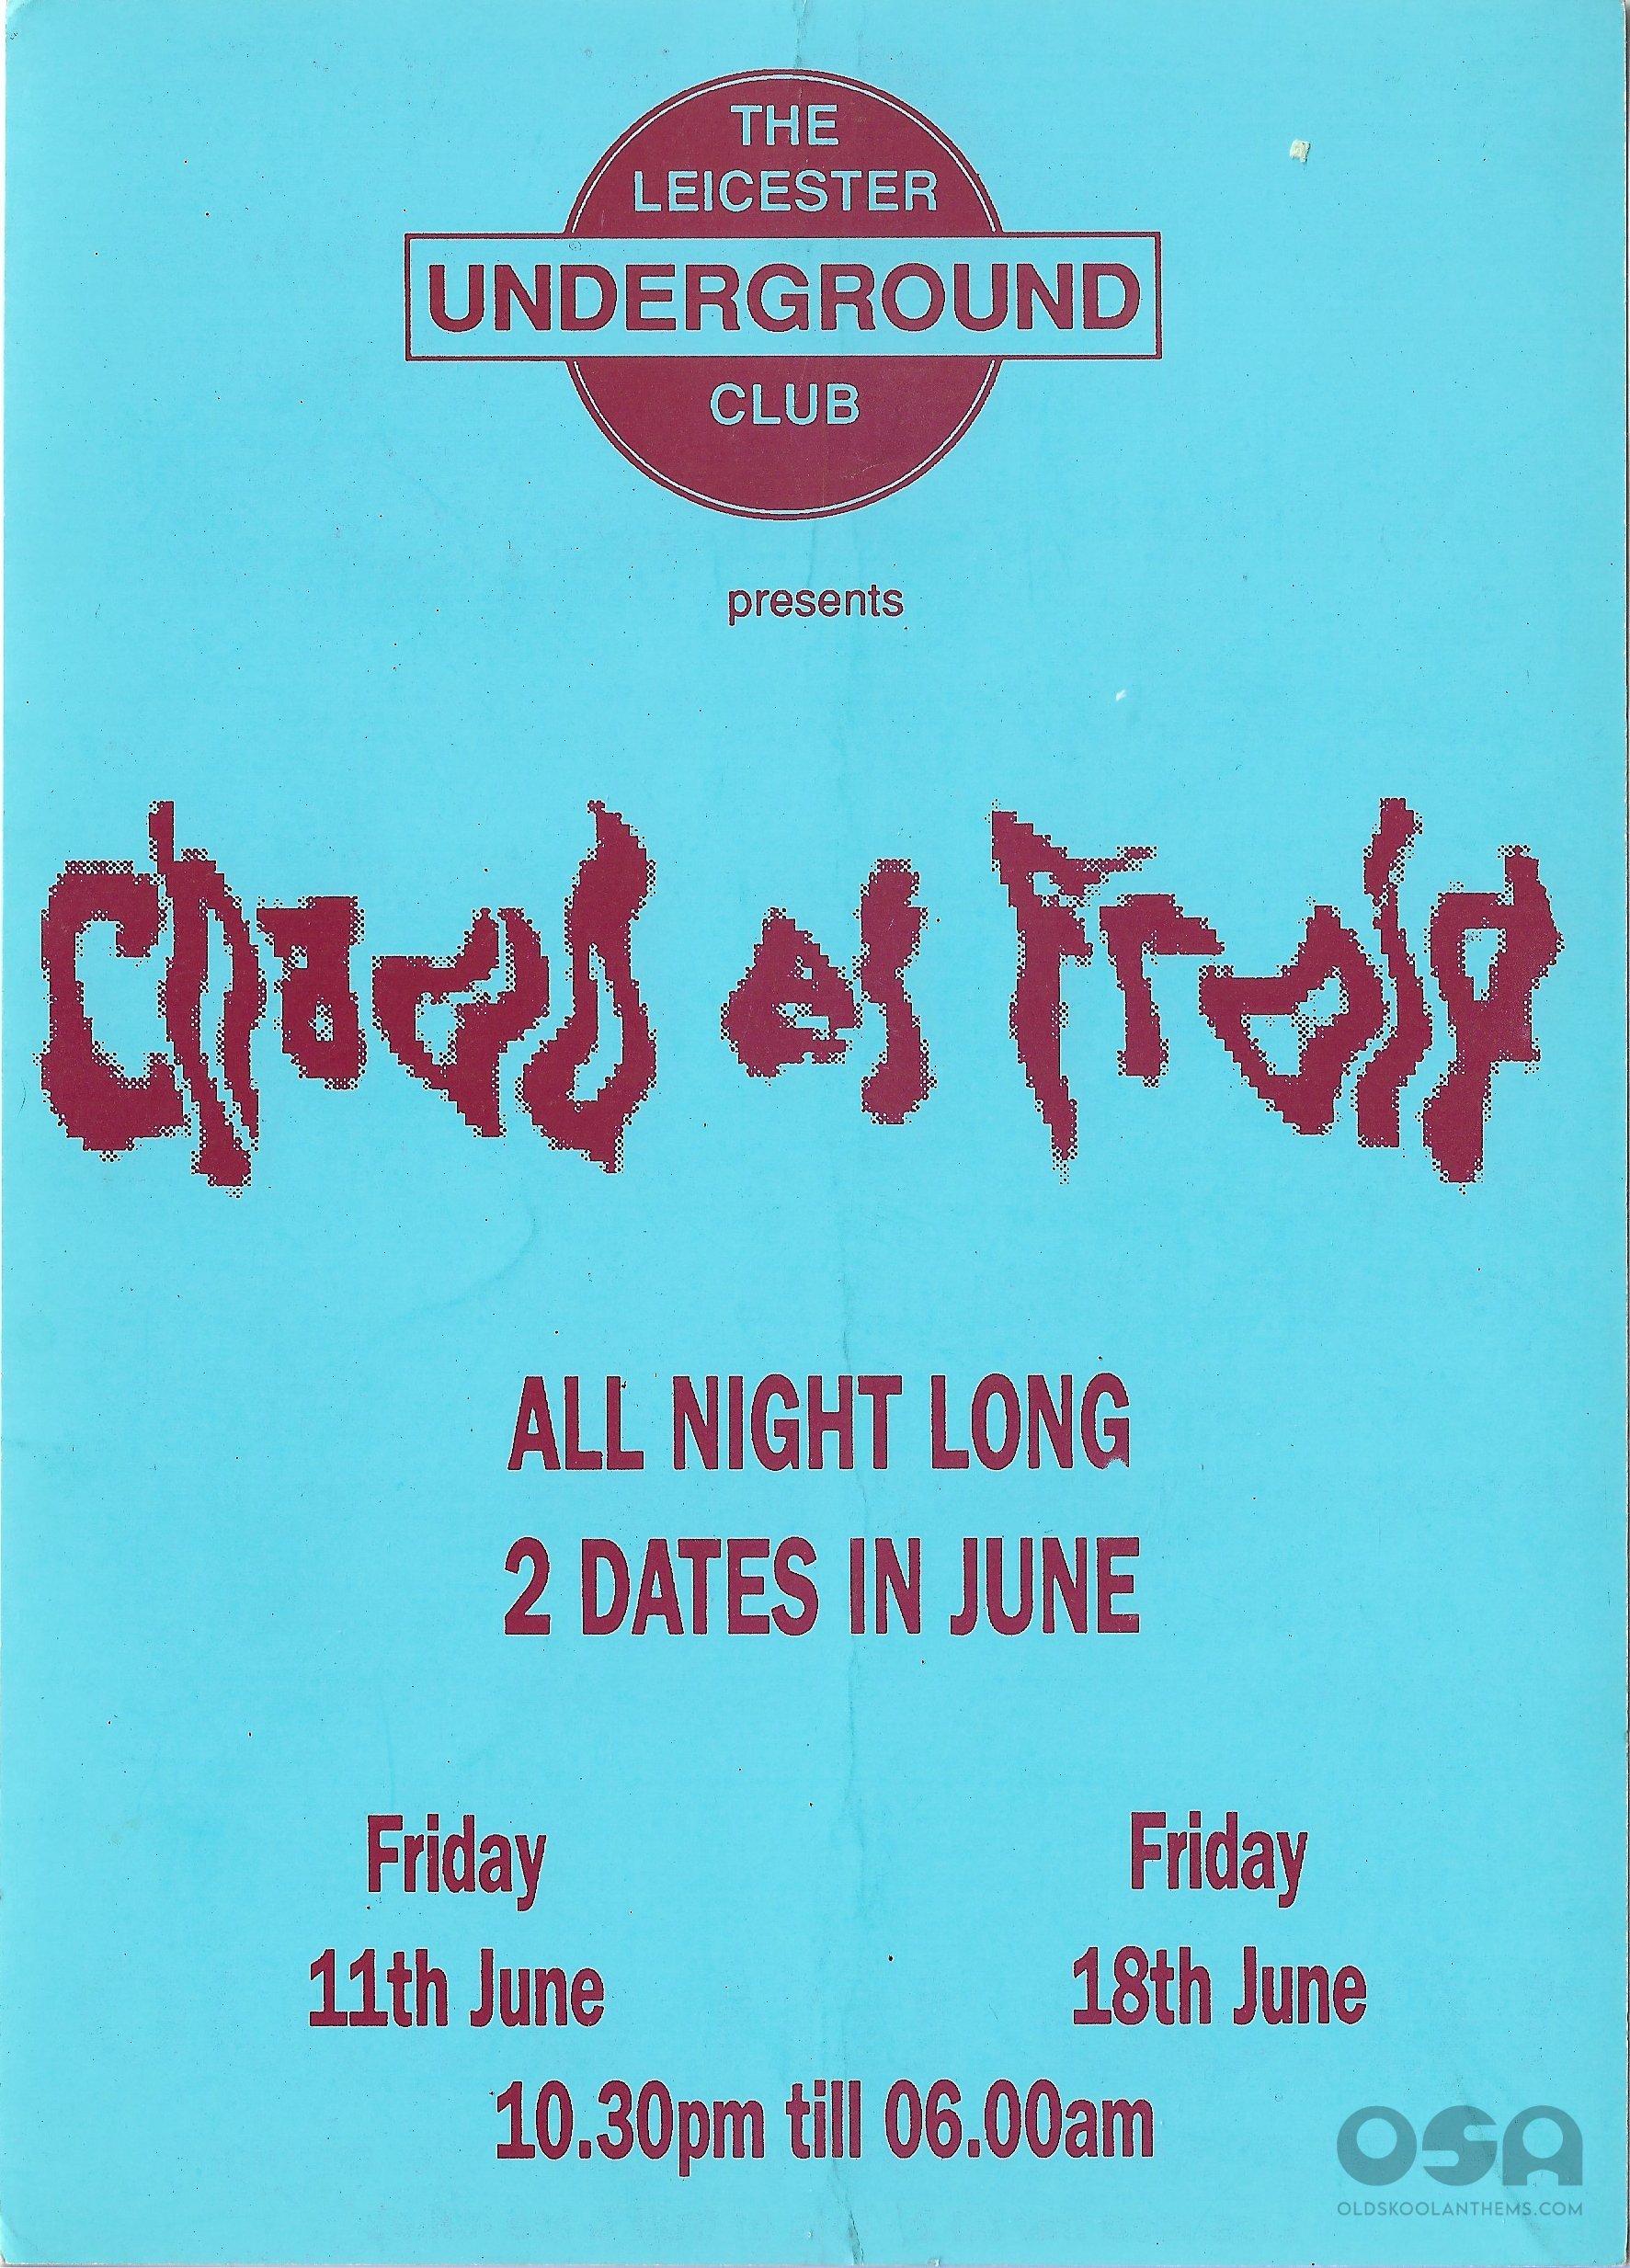 Chad Et Froid @ The Leicester Underground Club - 11th June & 18th June 1993 - A .jpg